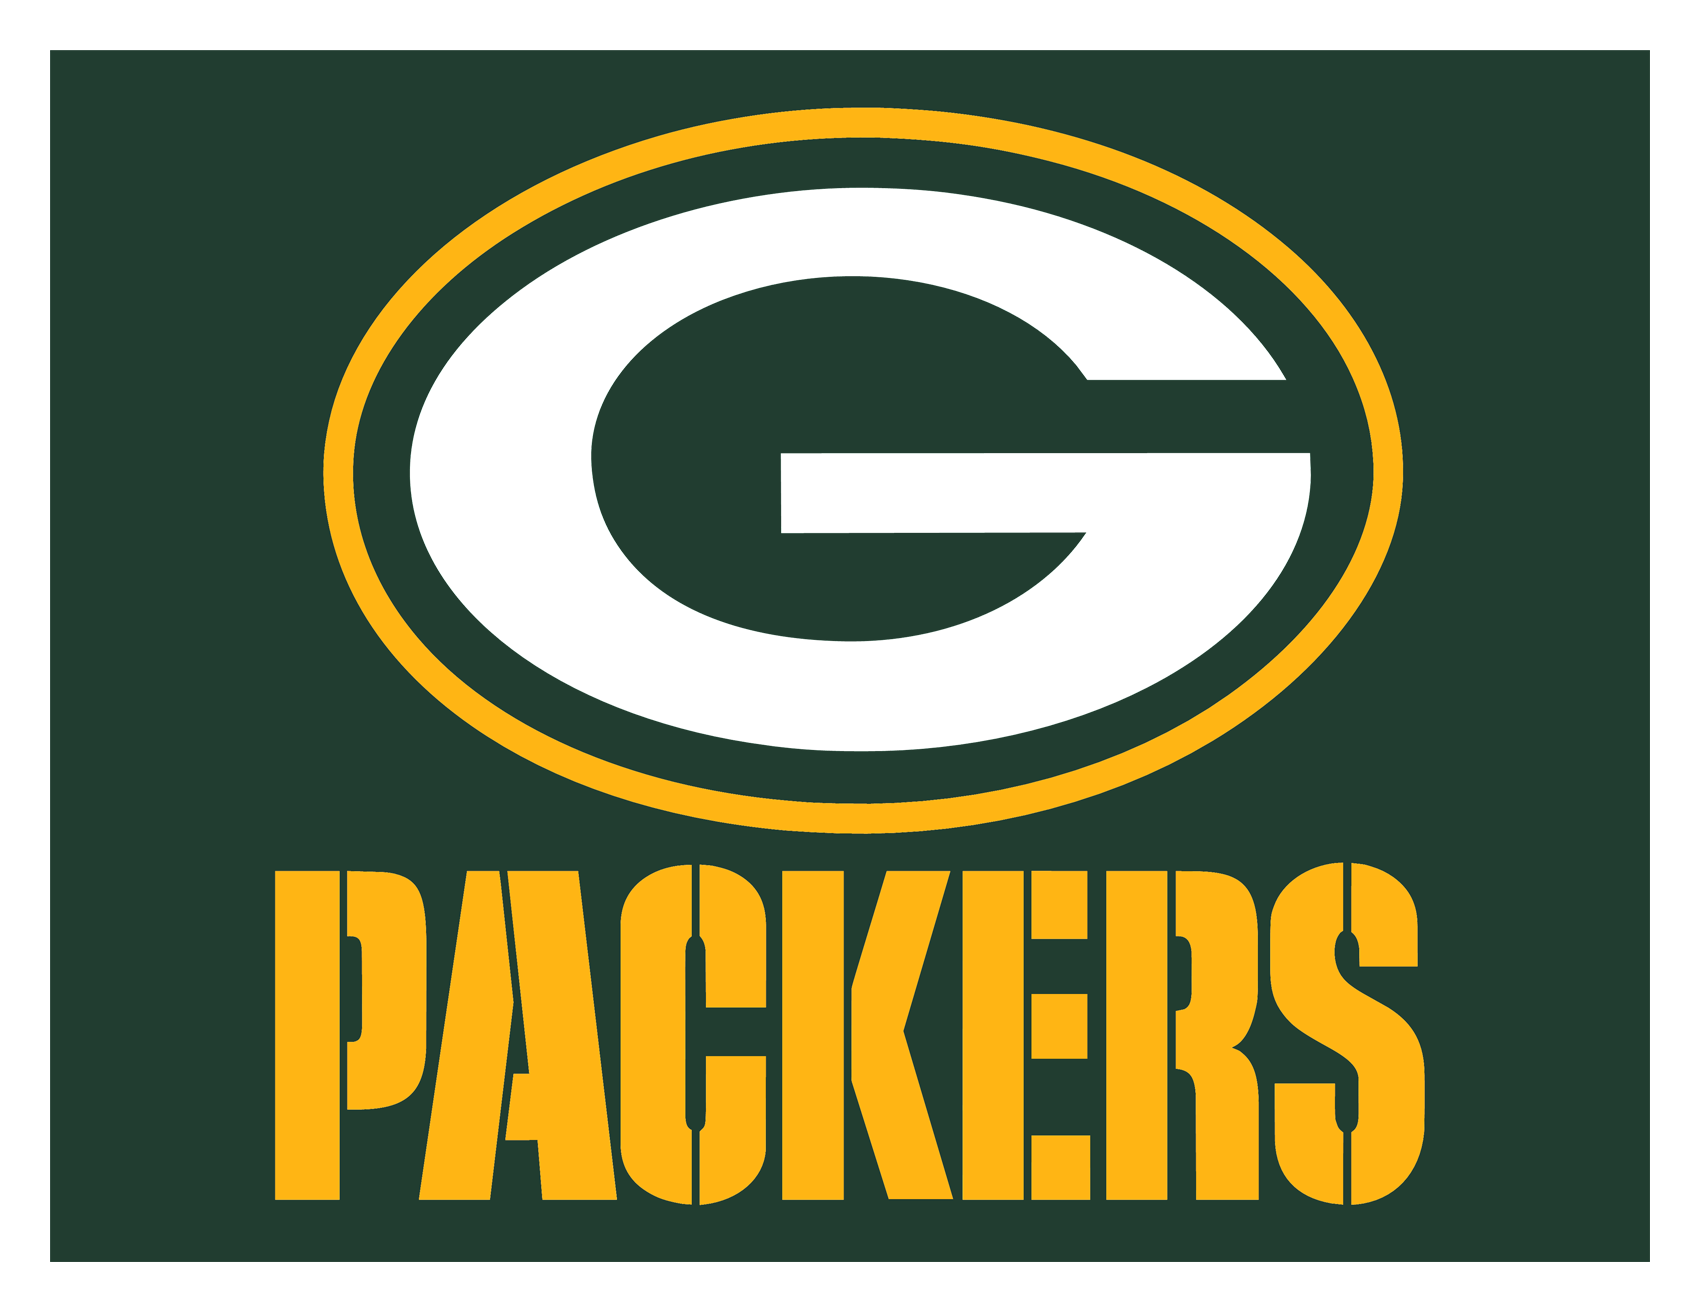 Green Bay Packers Logo / Panthers vs Packers NFL Betting Odds and